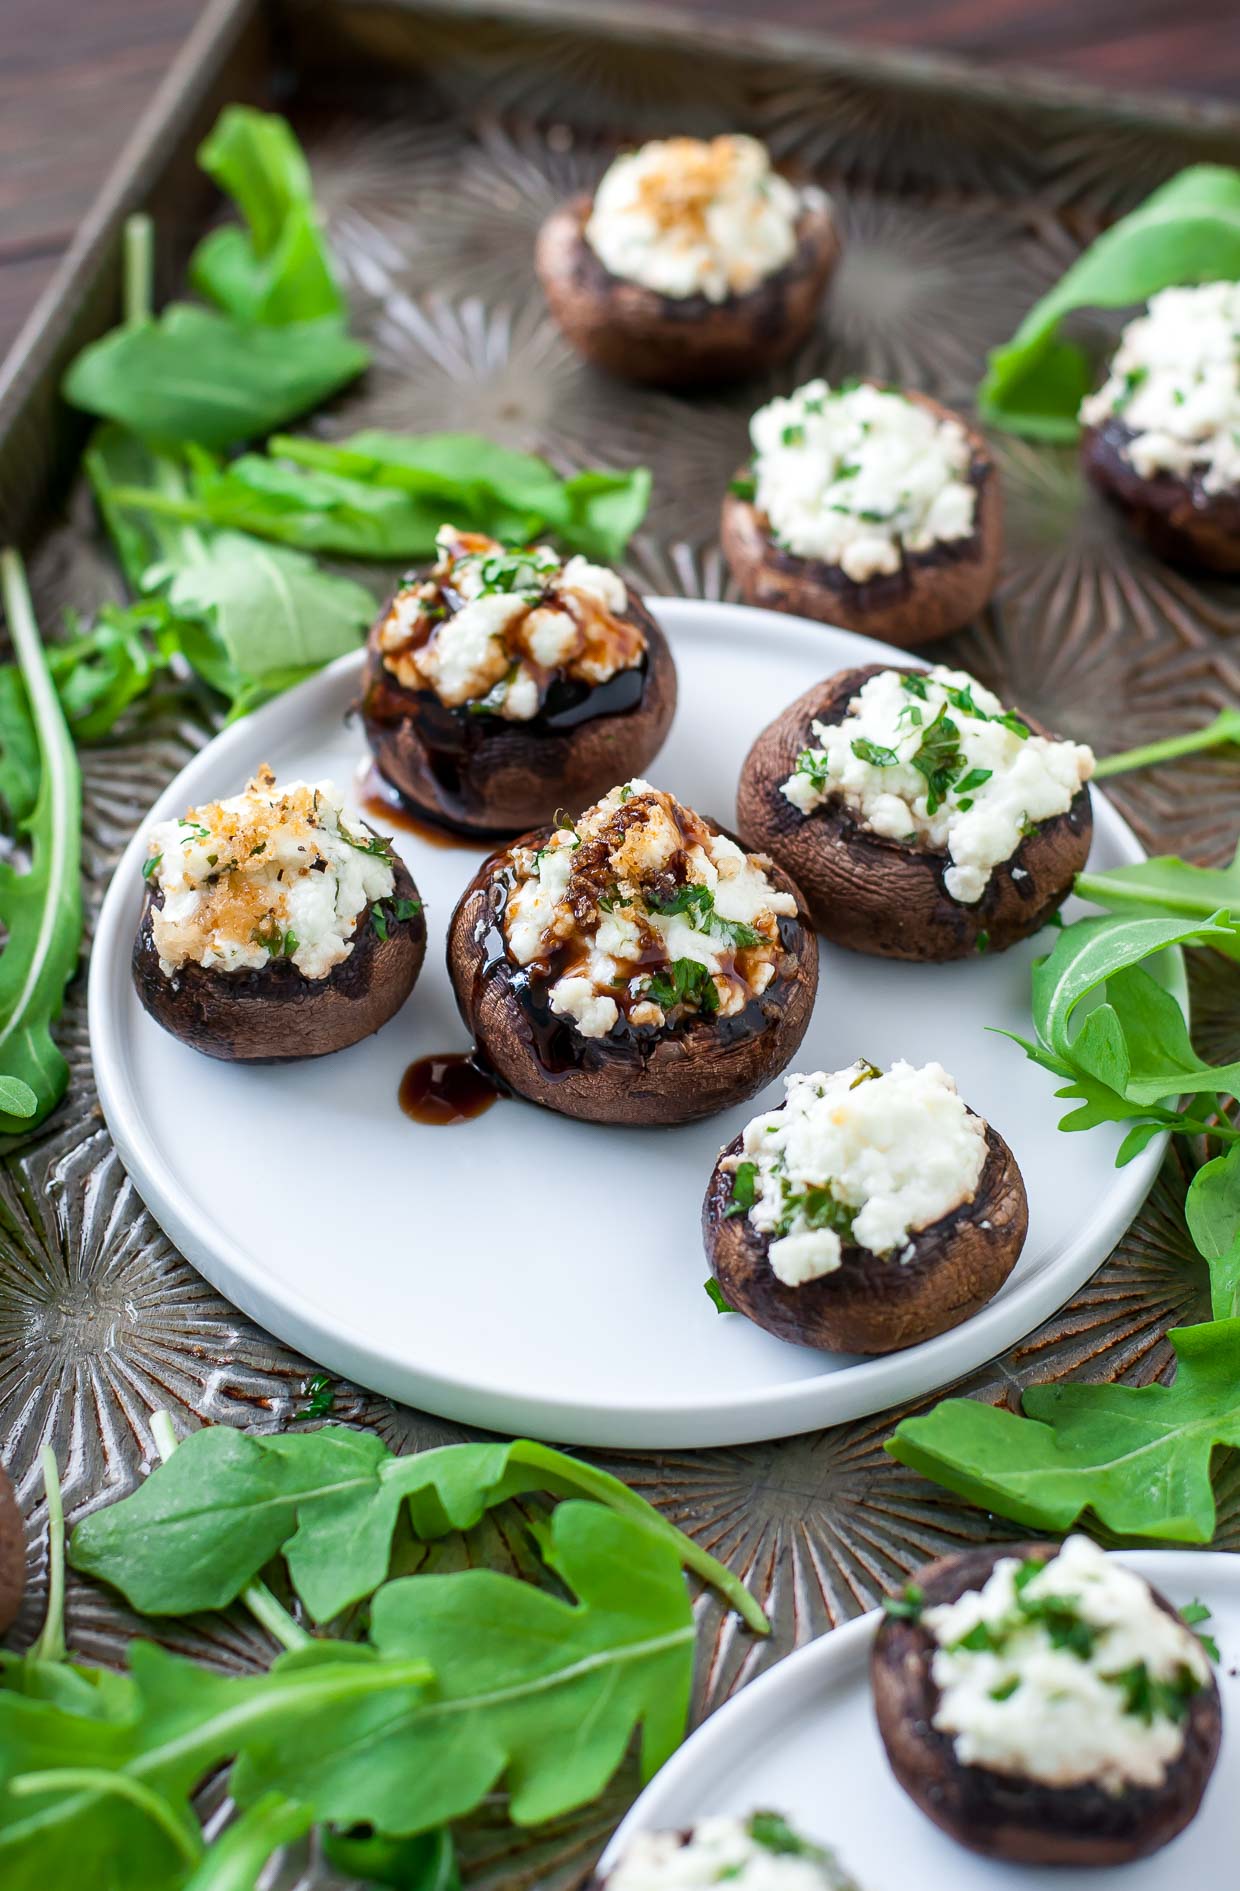 Let's jazz up our appetizer game! These herbed goat cheese stuffed mushrooms are piled high with savory whipped goat cheese, spiked with fresh herbs, and drizzled with a sweet + savory balsamic reduction to make them over-the-top delicious.